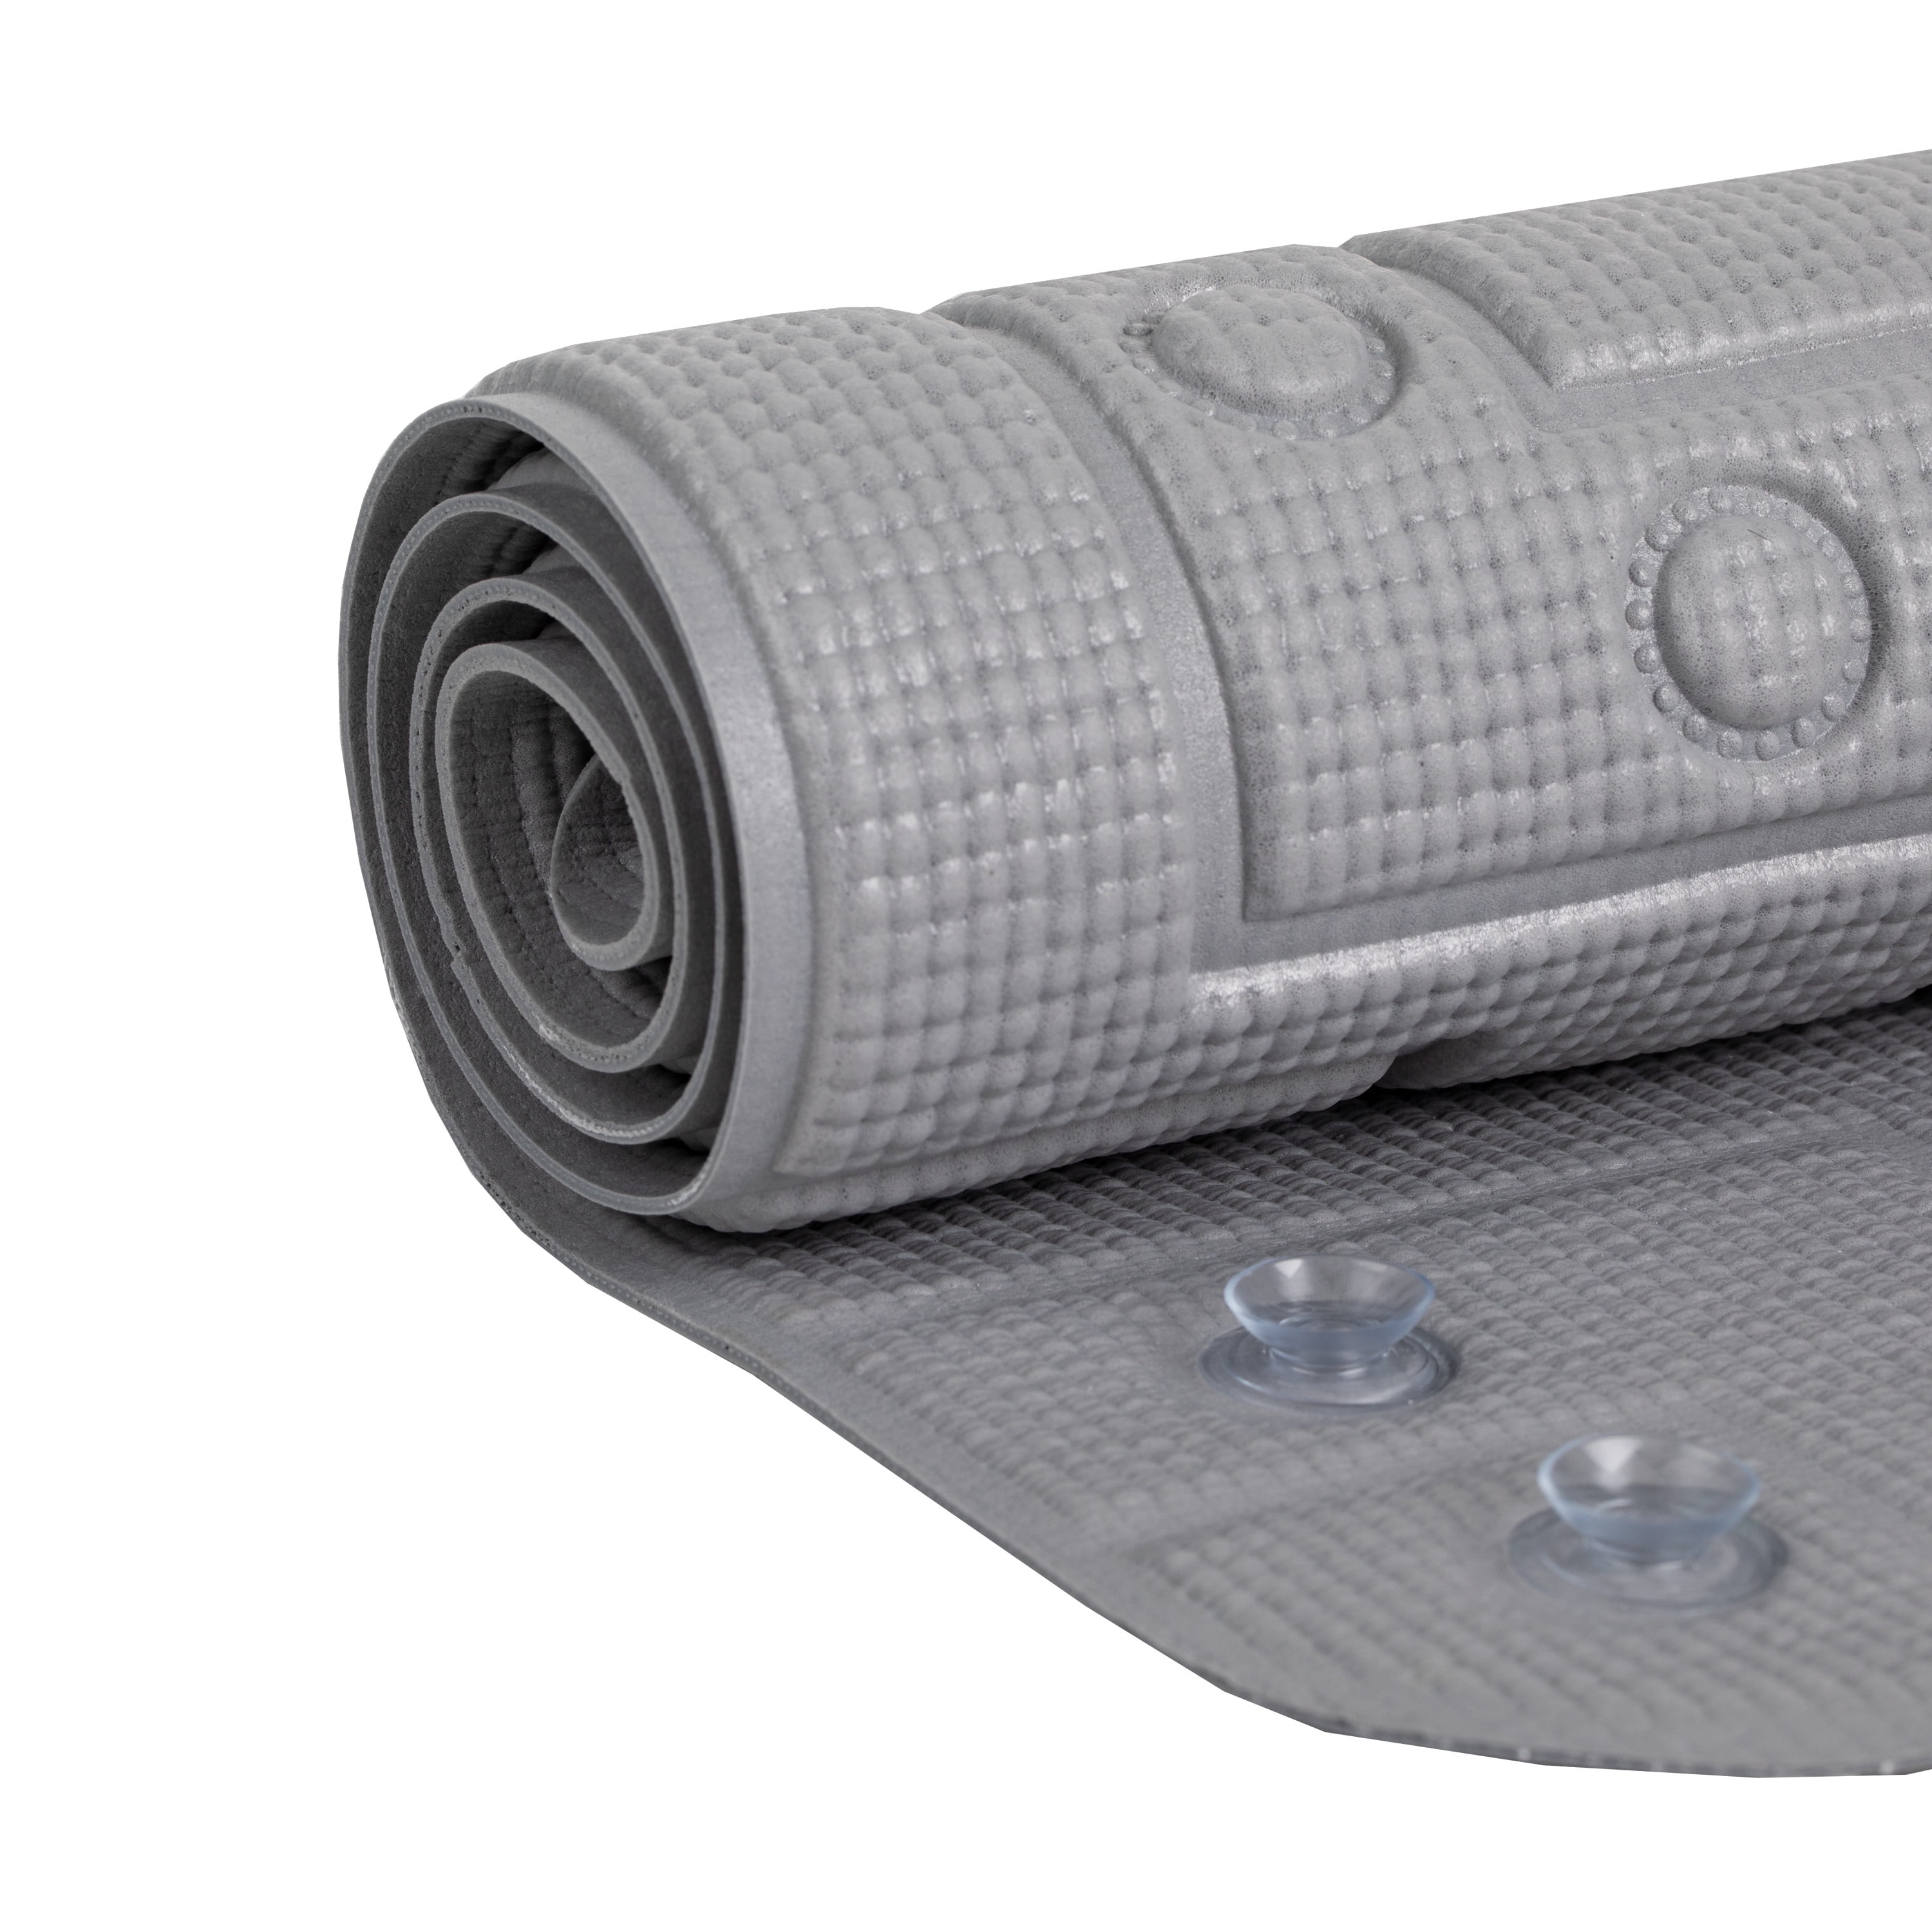 Duck Brand Gray Safety Grip Tub Mat, 17 in. x 36 in.